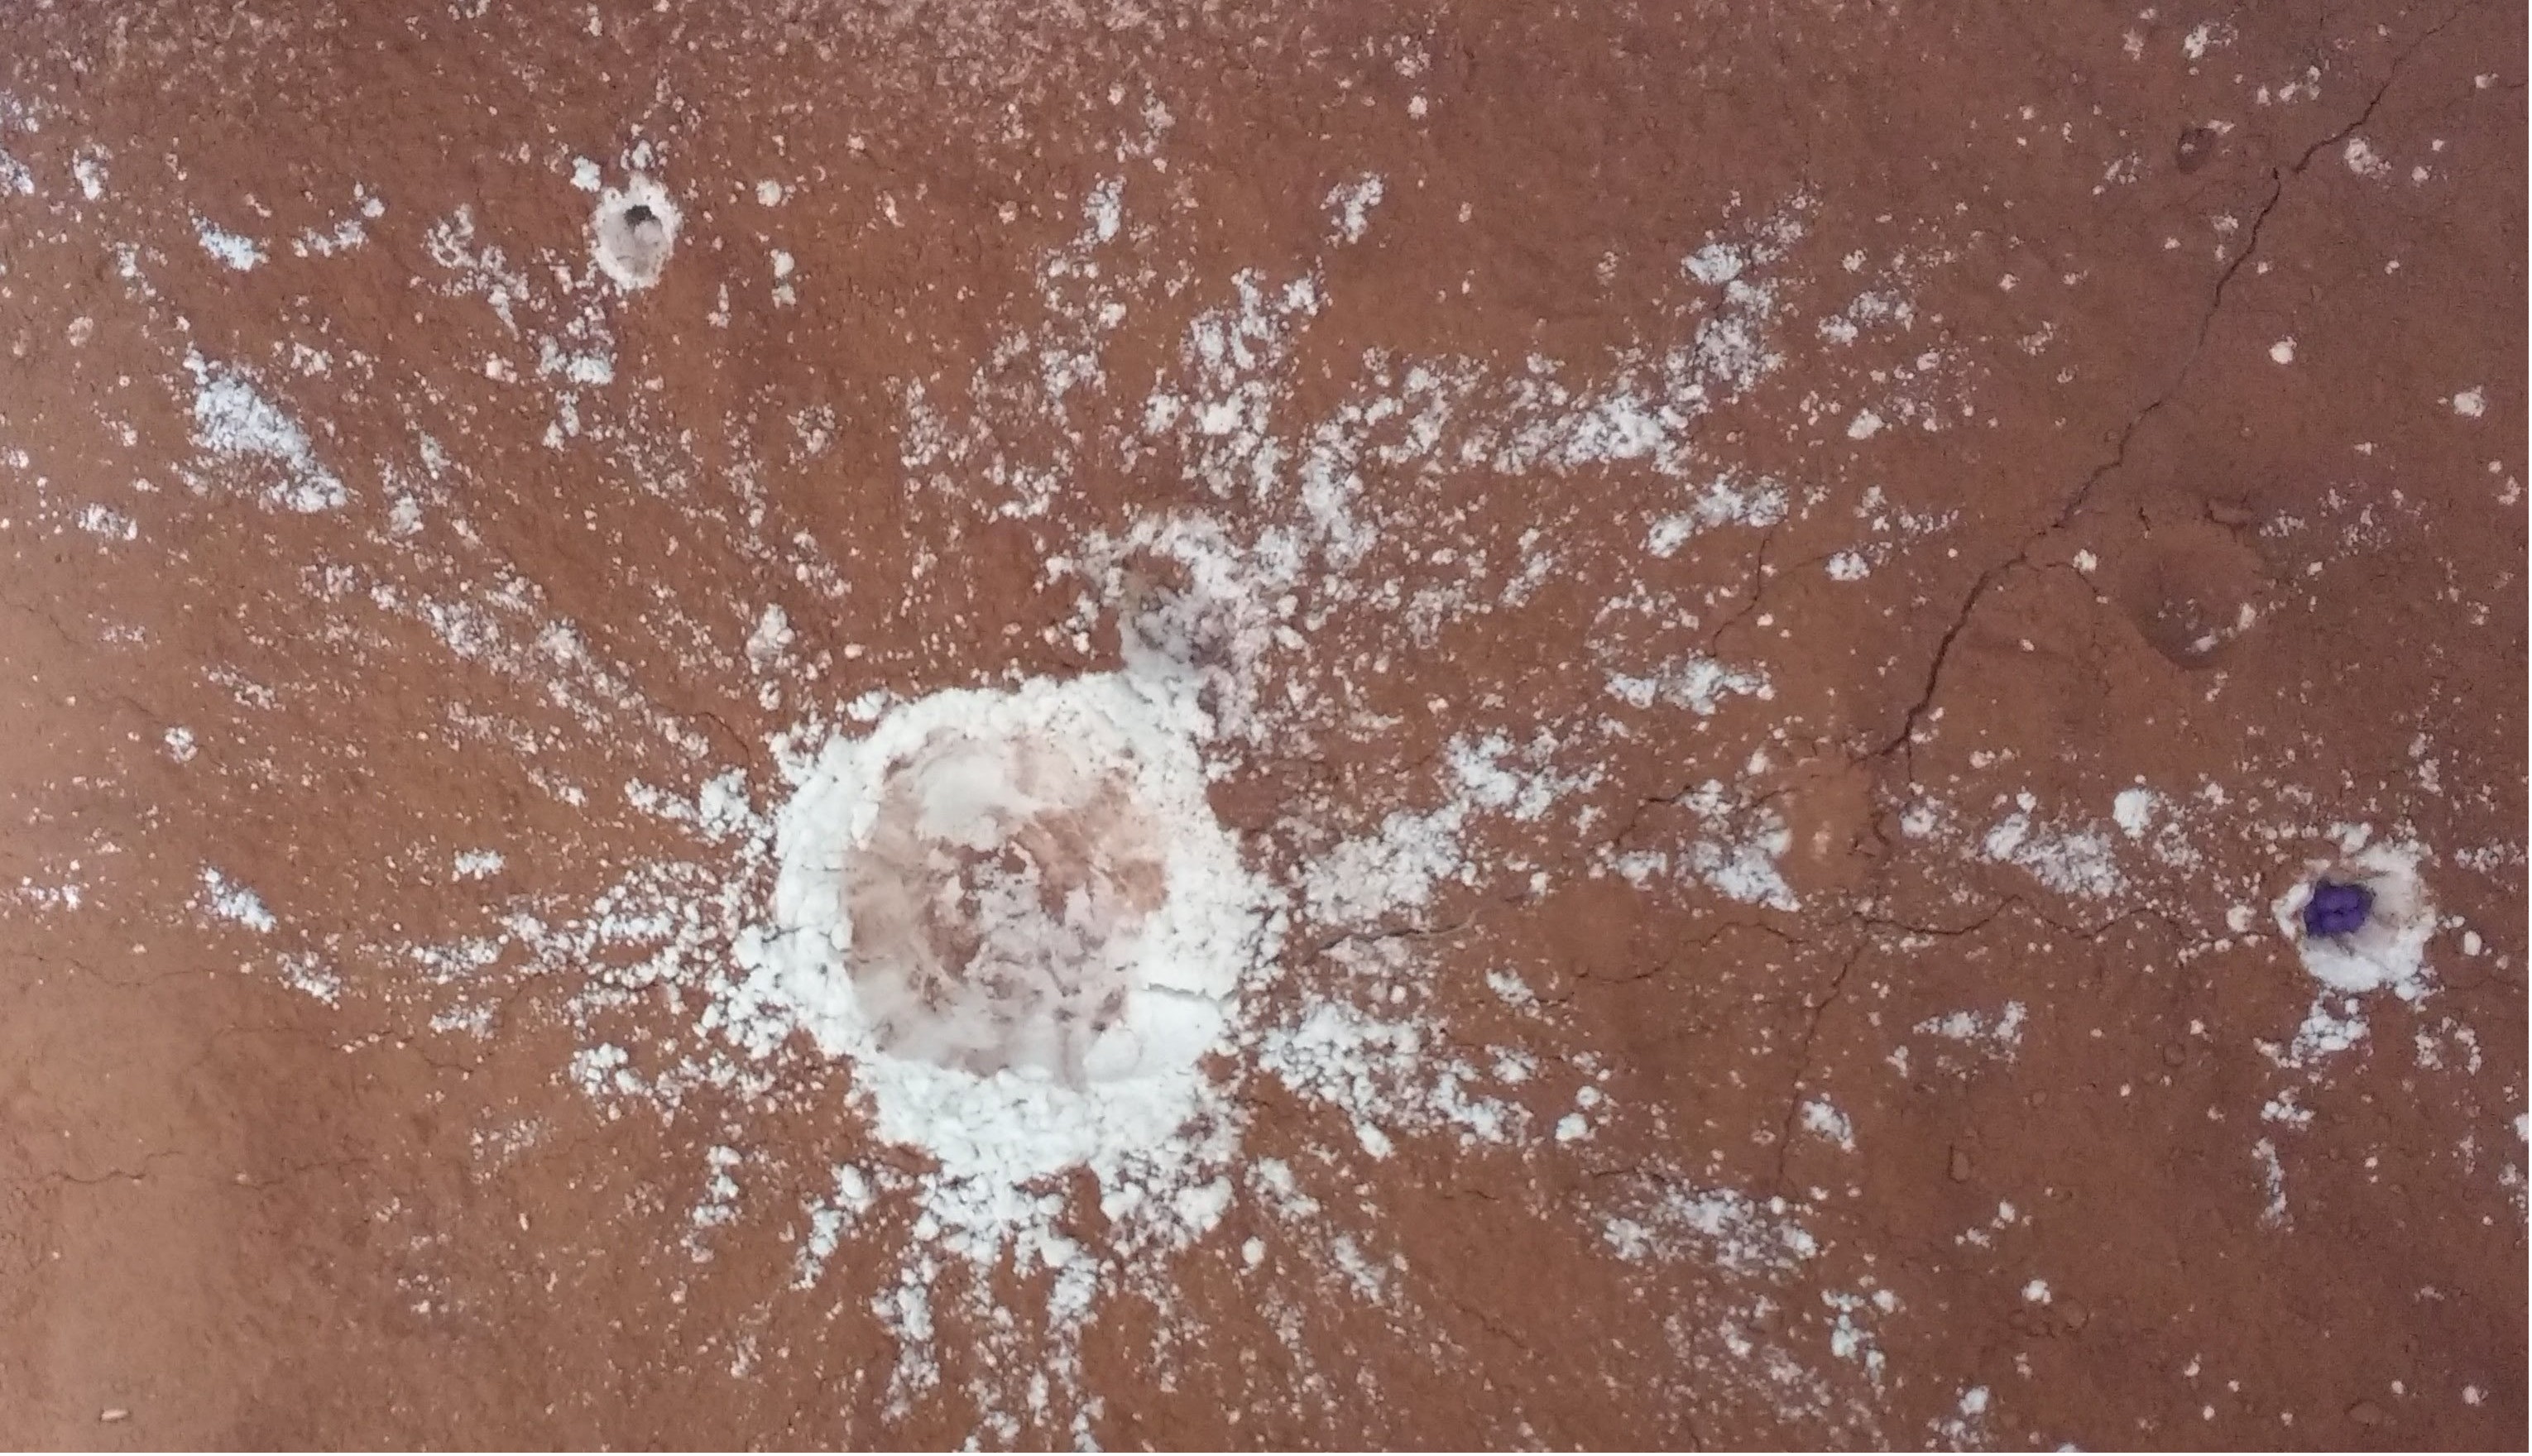 Image of a flour crater made by a student.